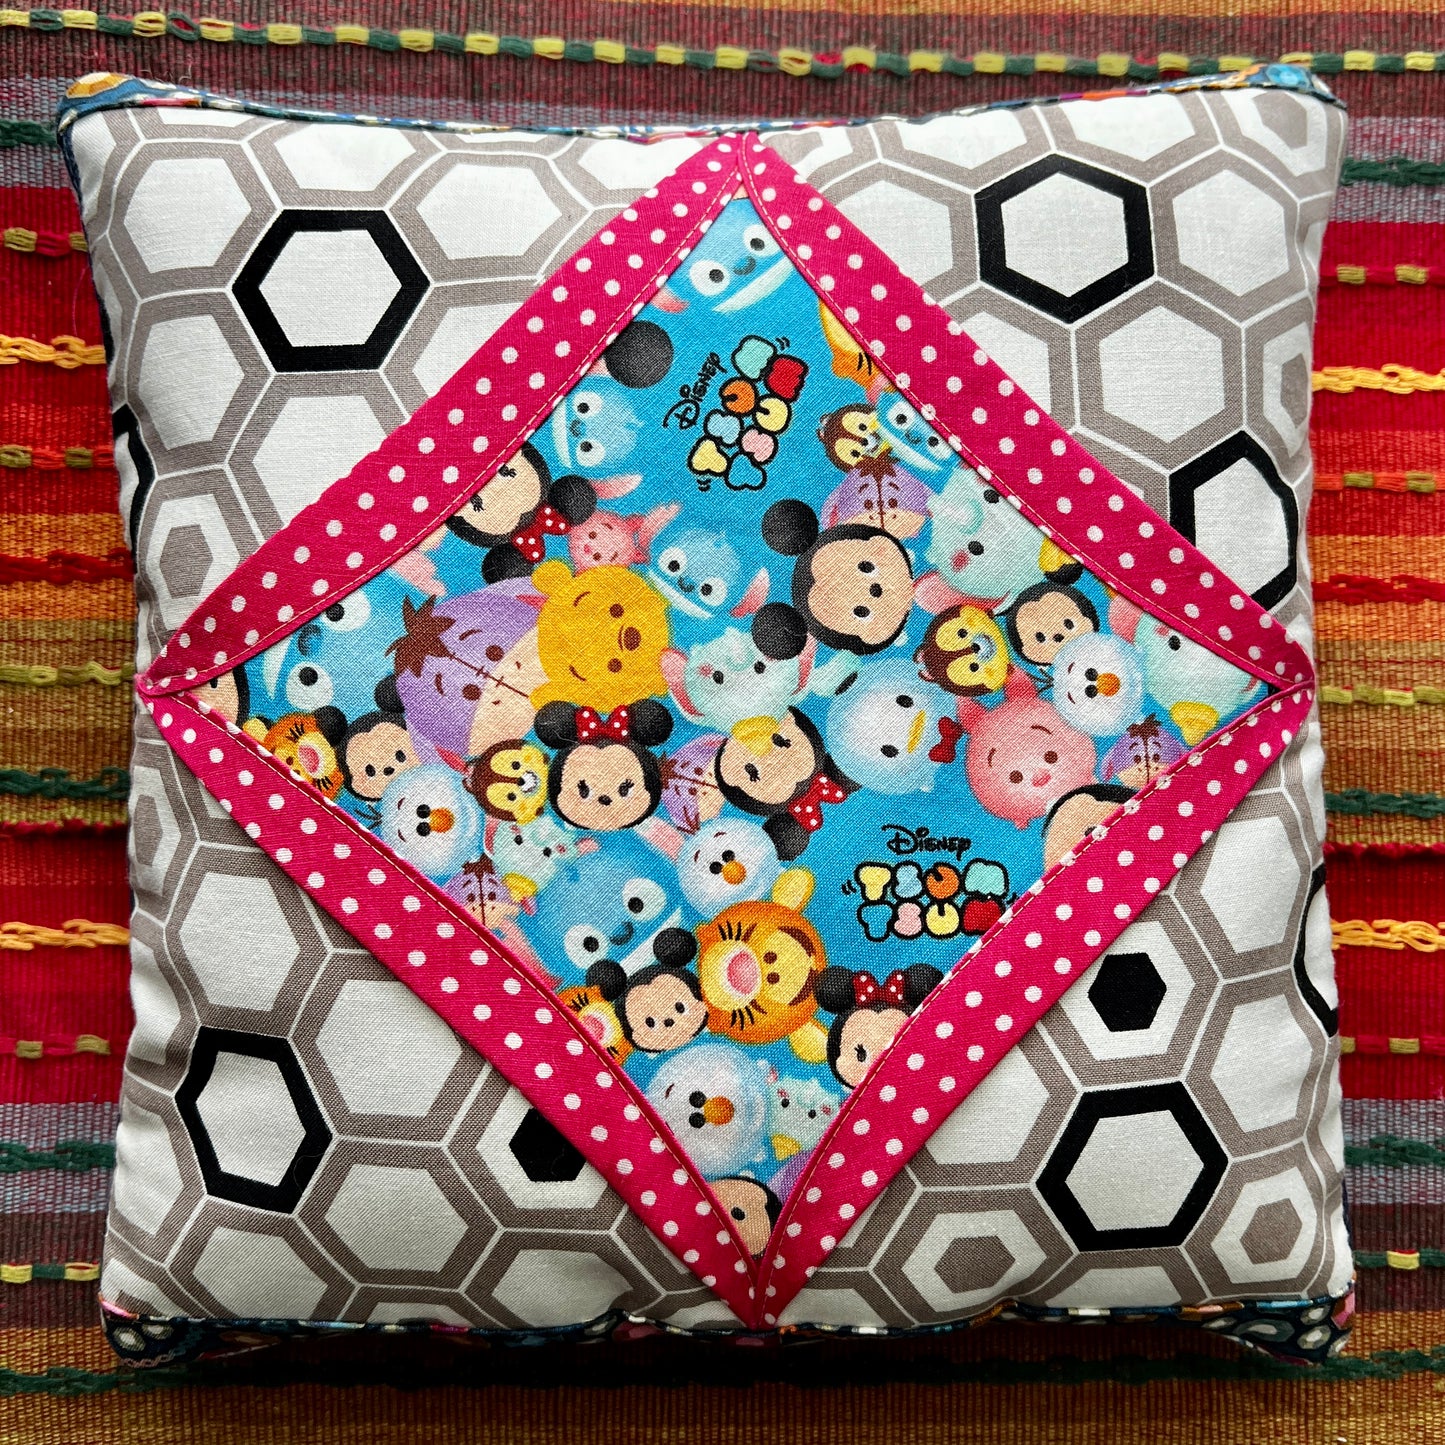 Little Pillow - Tooth Fairy Pocket - Cathedral Square Design